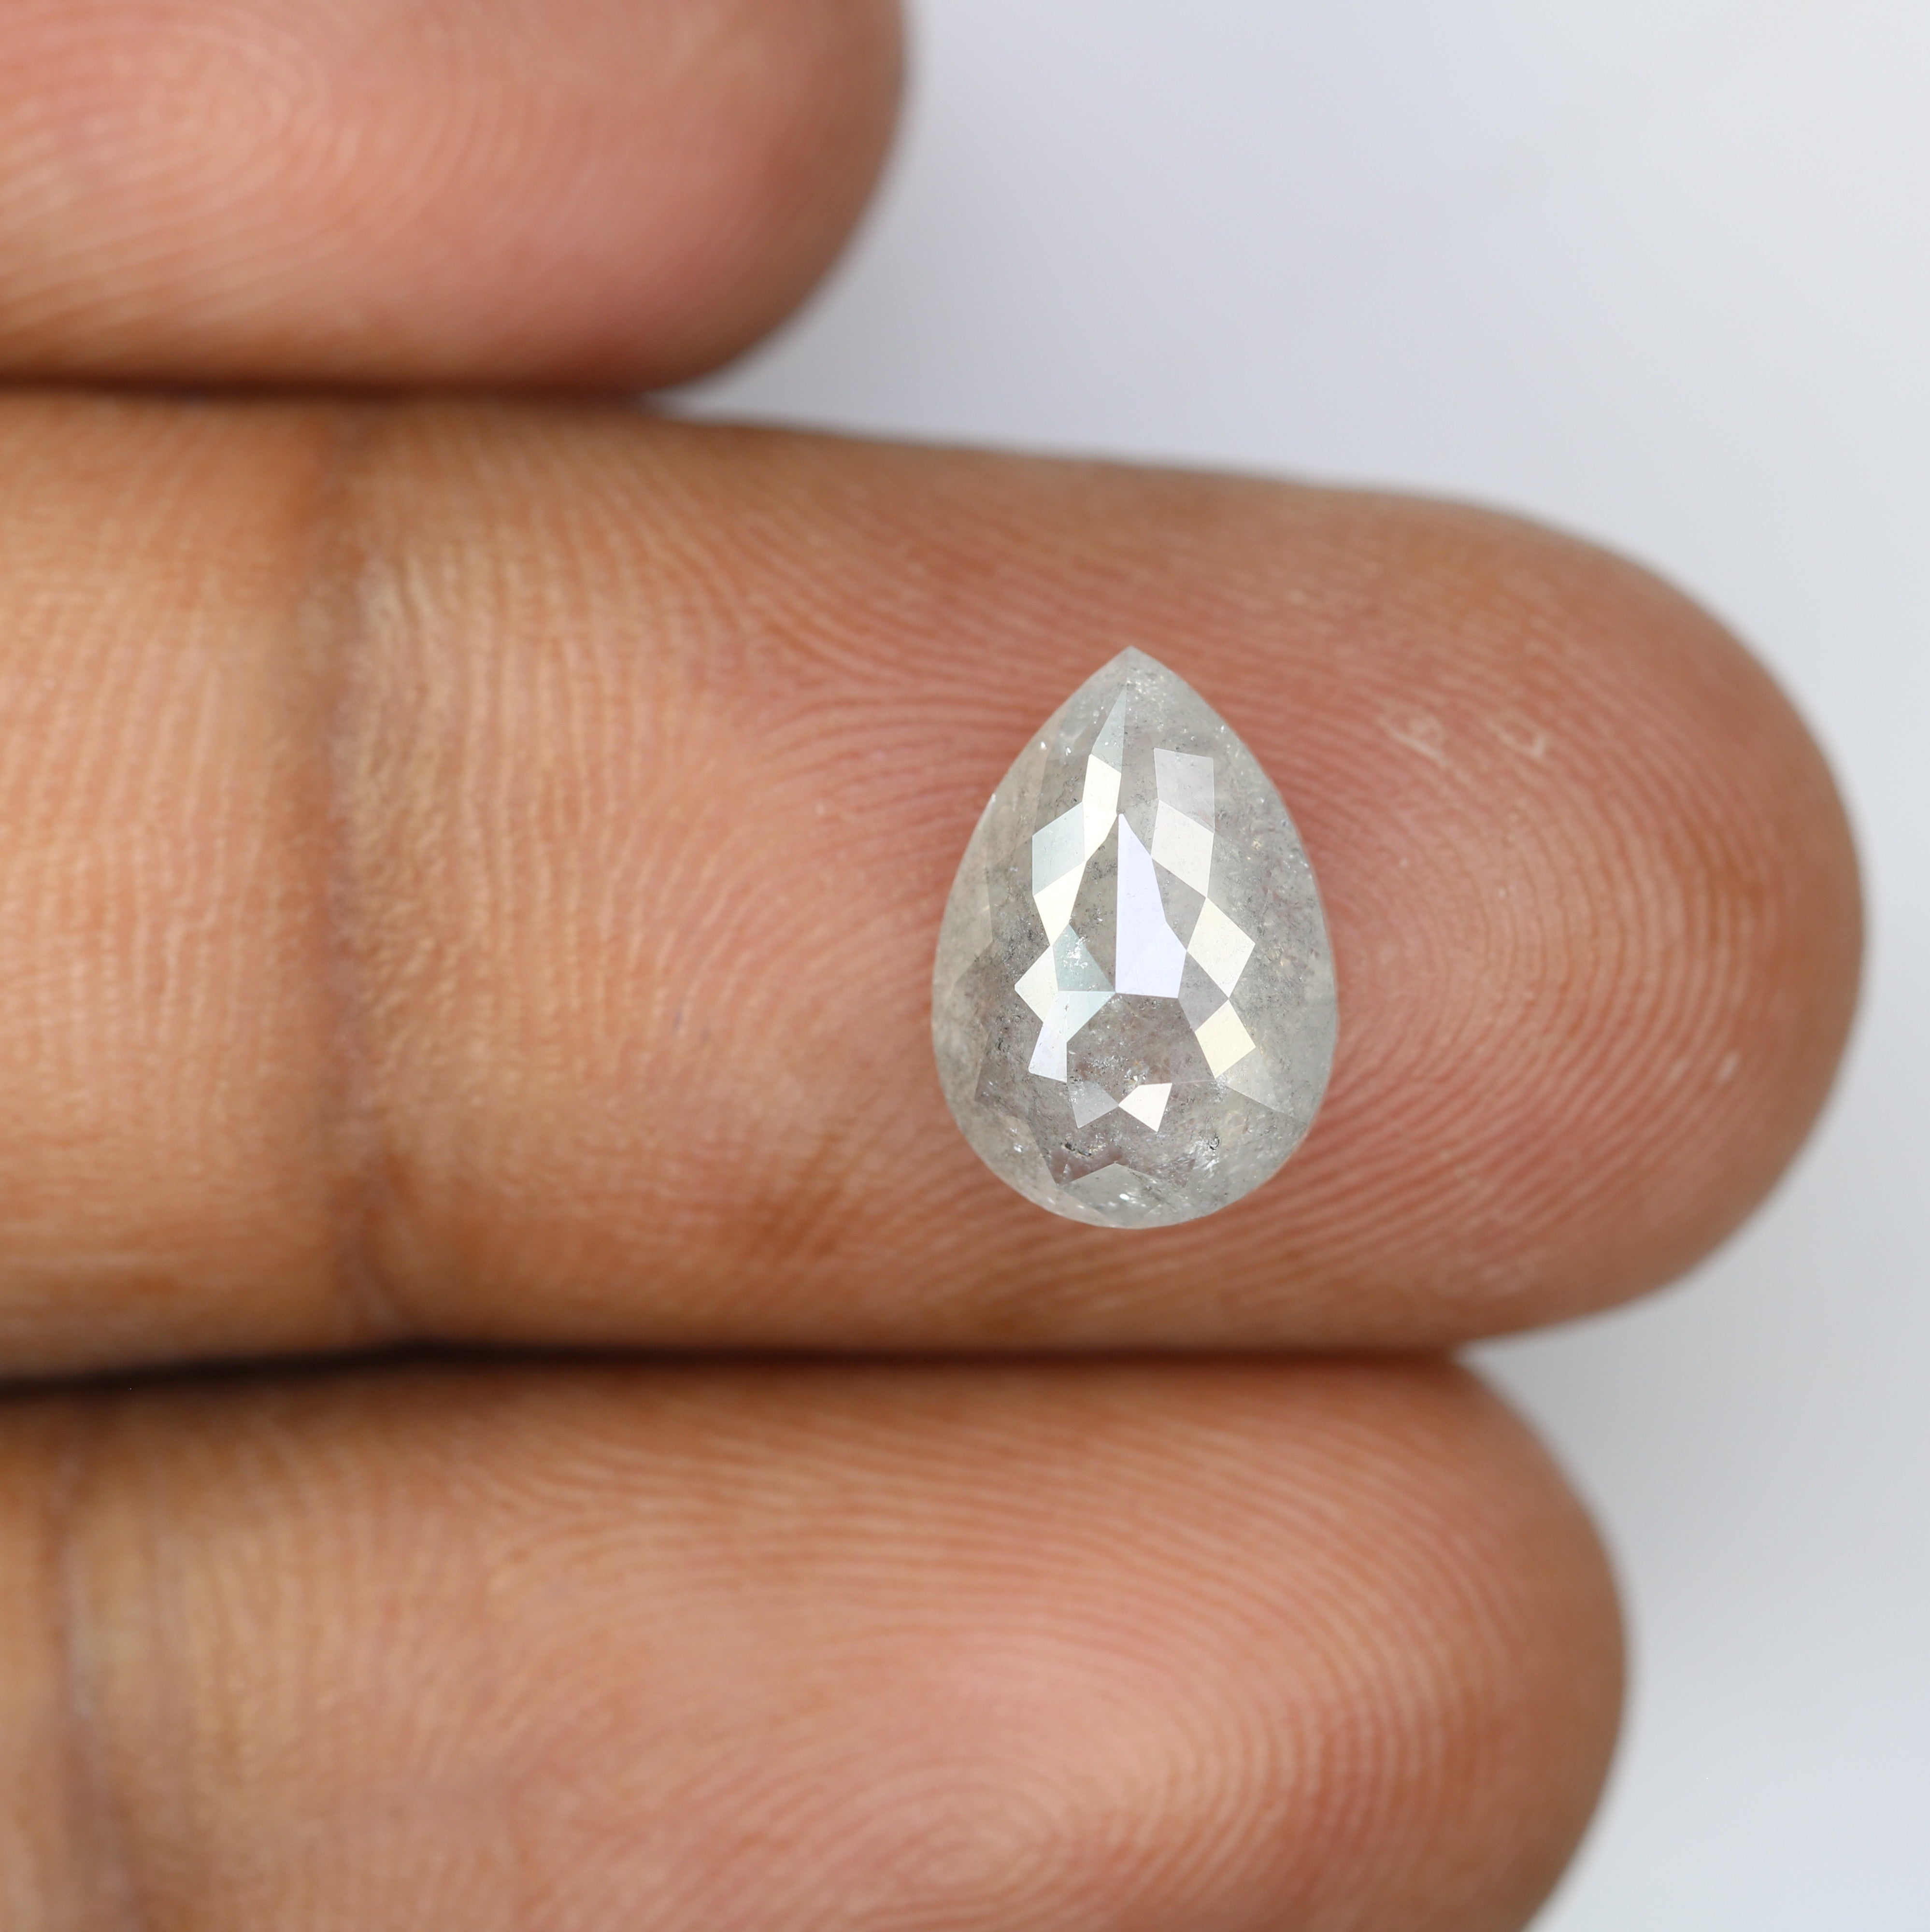 2.66 CT 11.00 MM Pear Shape Salt And Pepper Diamond For Engagement Ring